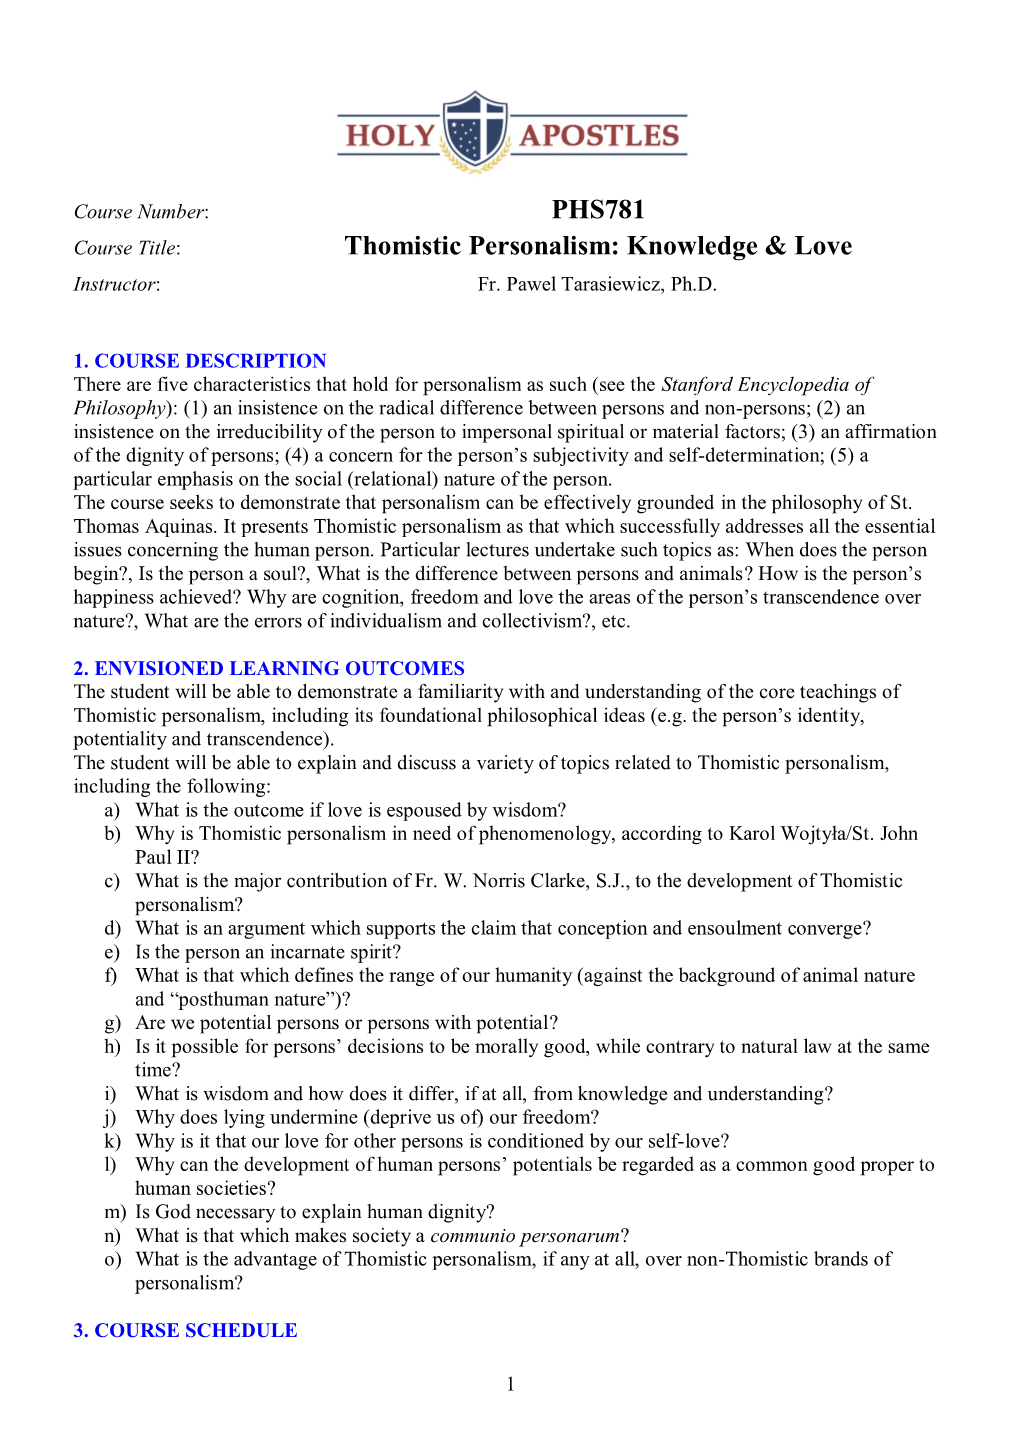 Thomistic Personalism: Knowledge & Love